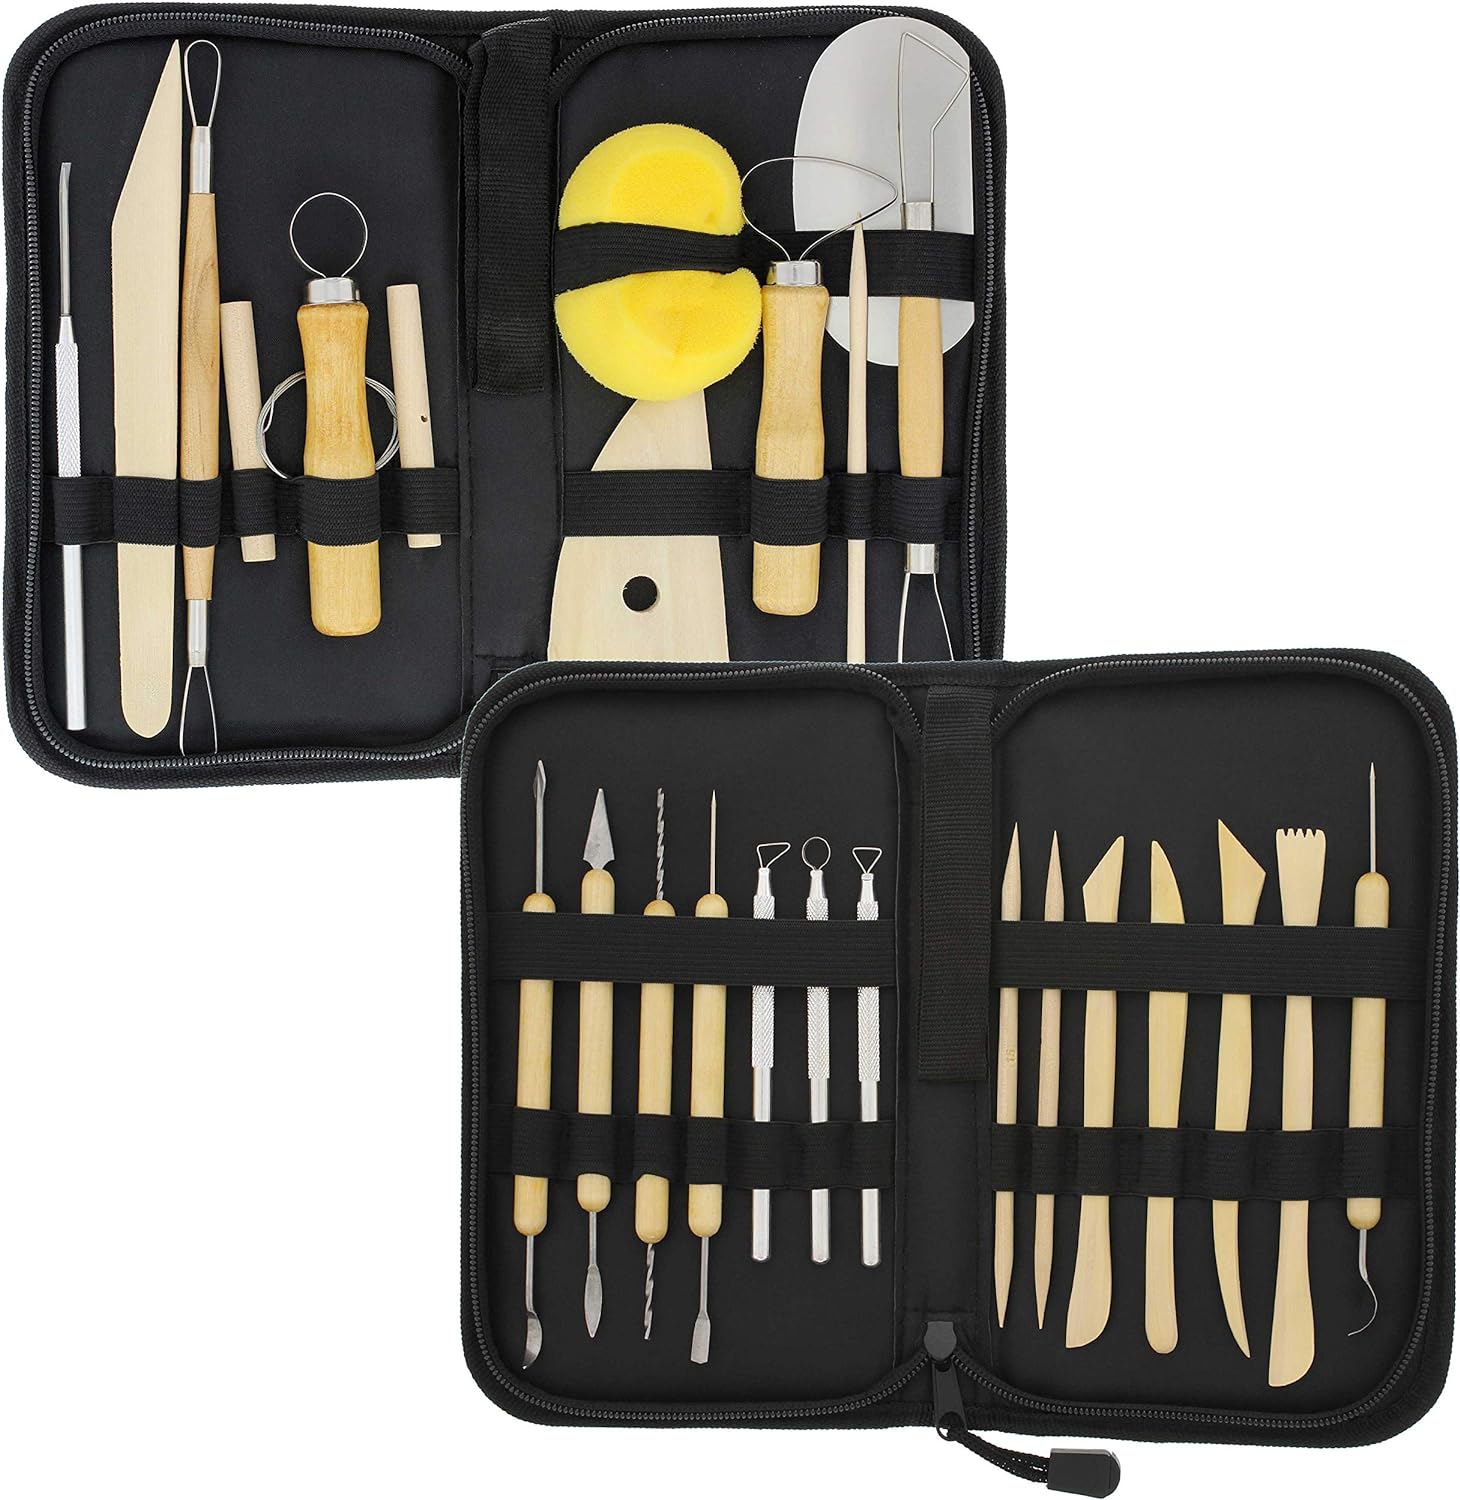 U.S. Art Supply 26-Piece Pottery & Clay Sculpting Tool Sets with Canvas Cases